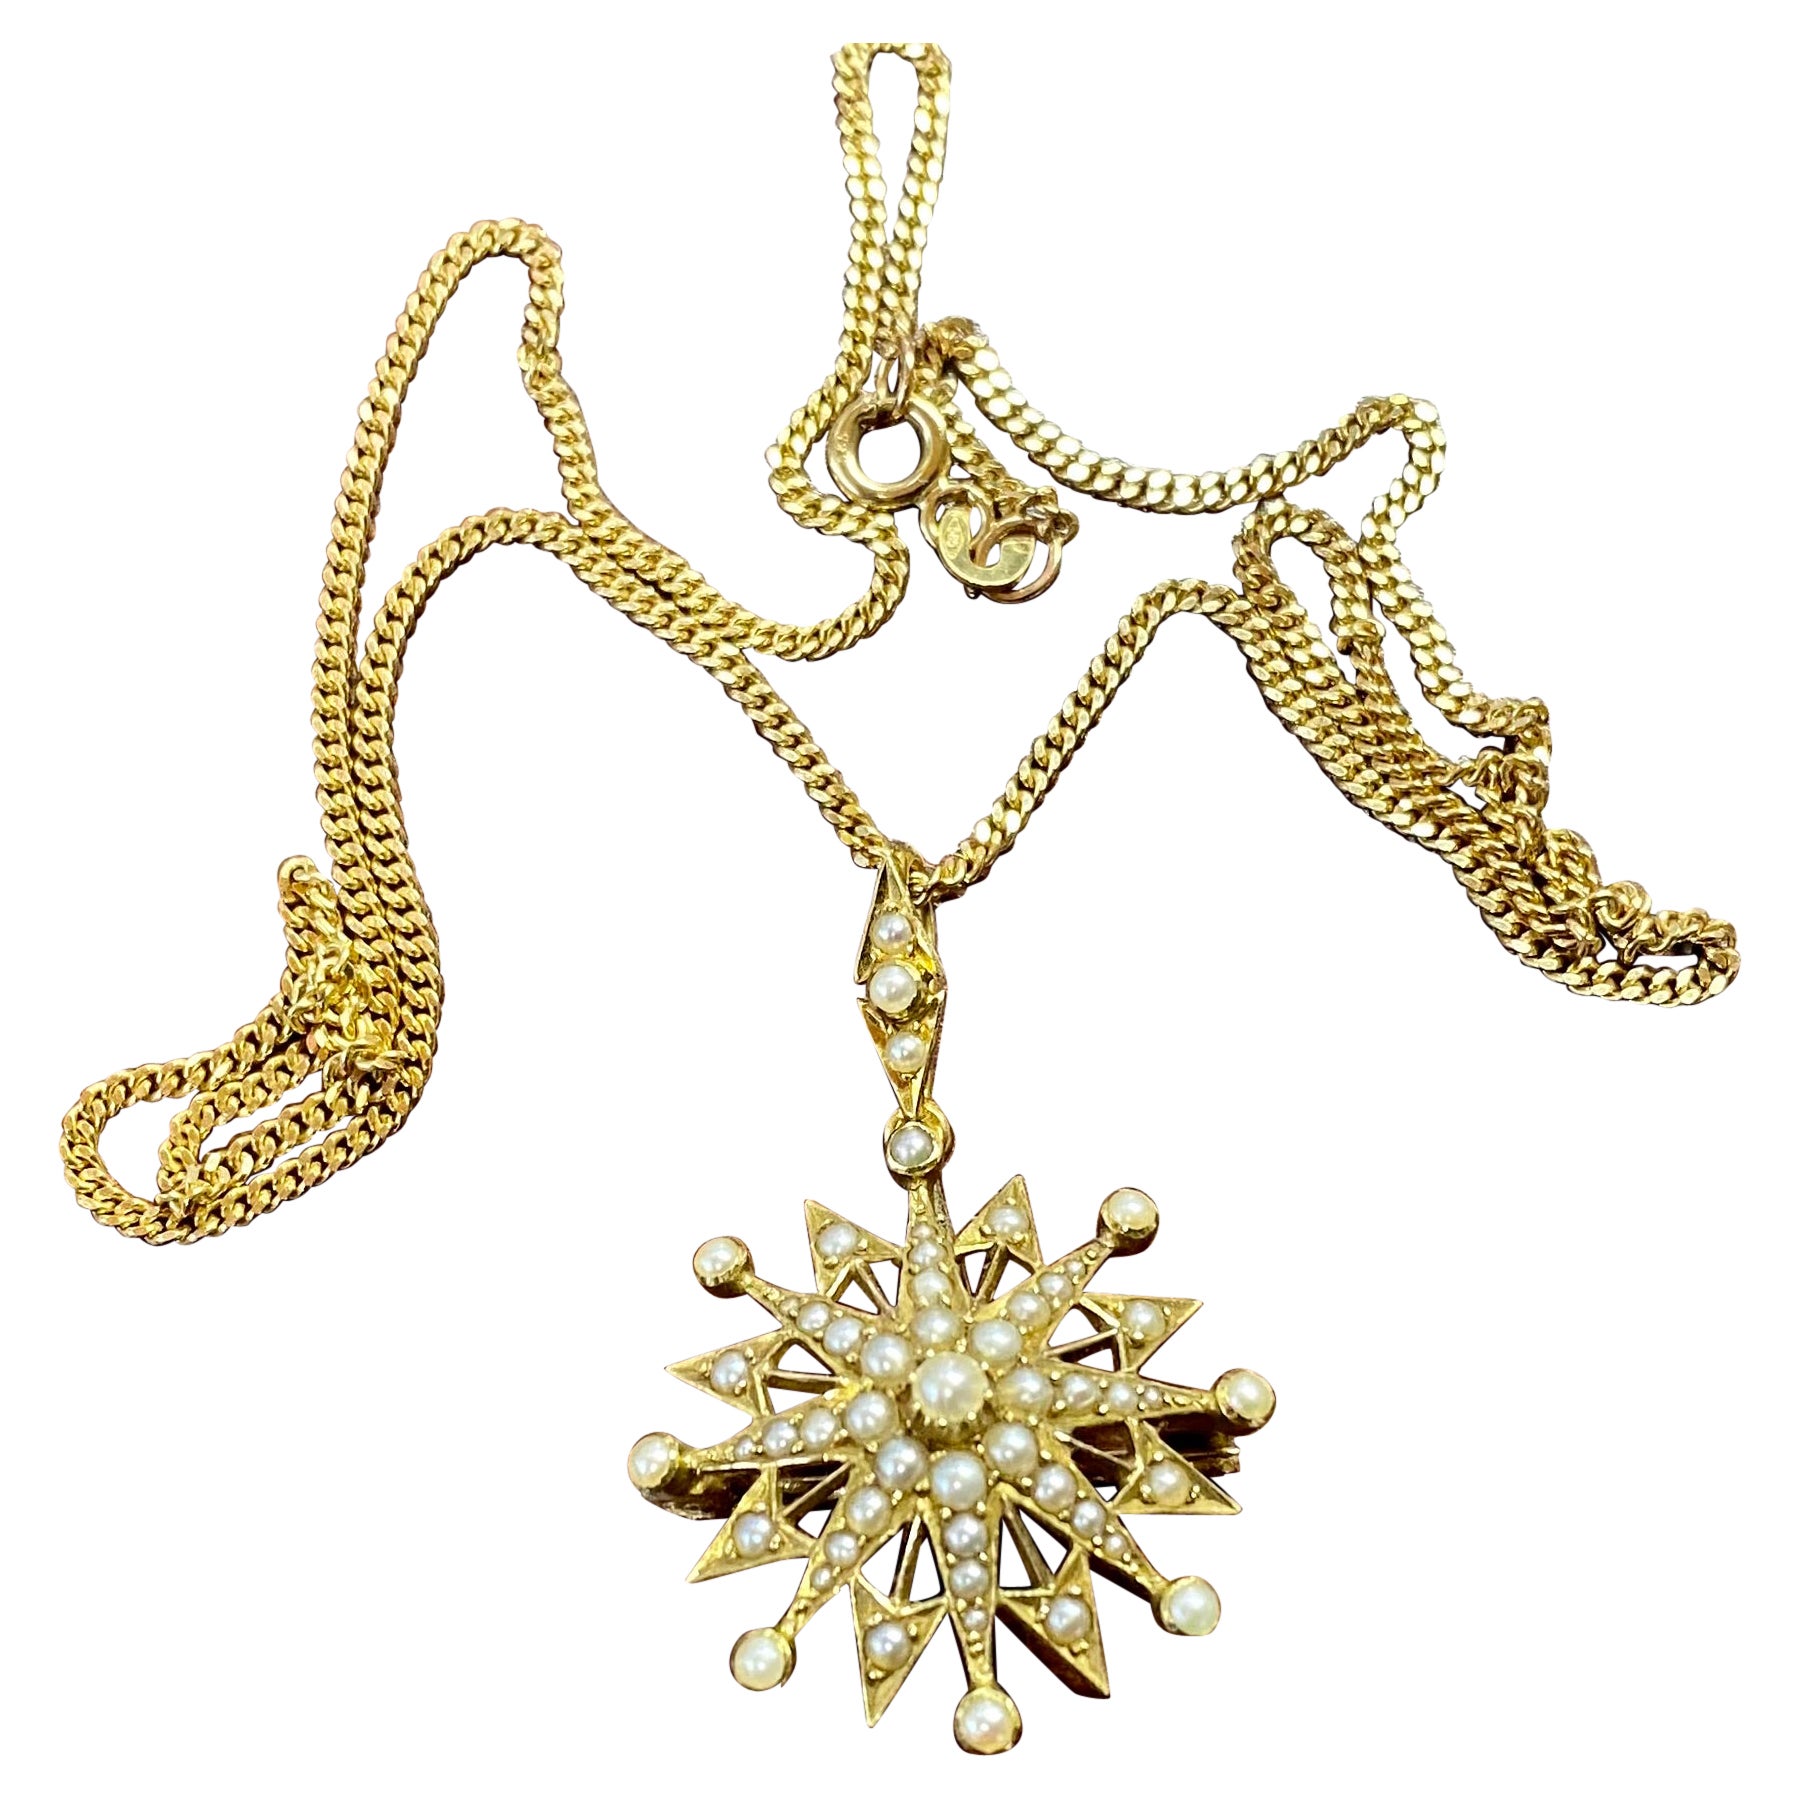 14 Karat Gold Star Pendant with Pearls. For Sale